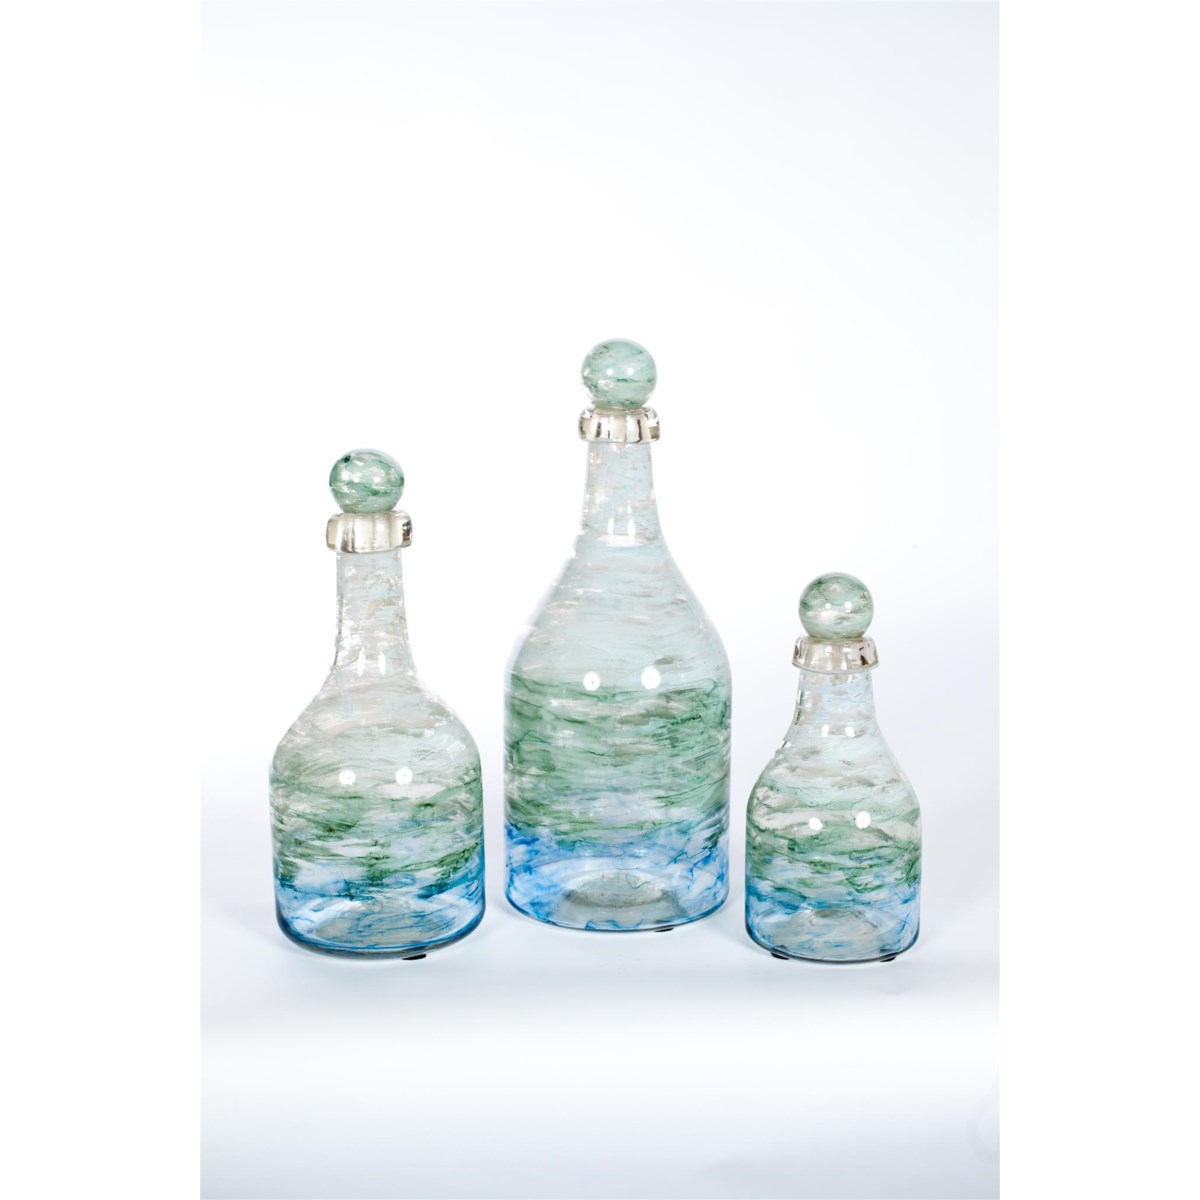 Bottles with Tops Set of 3 in Ocean Finish